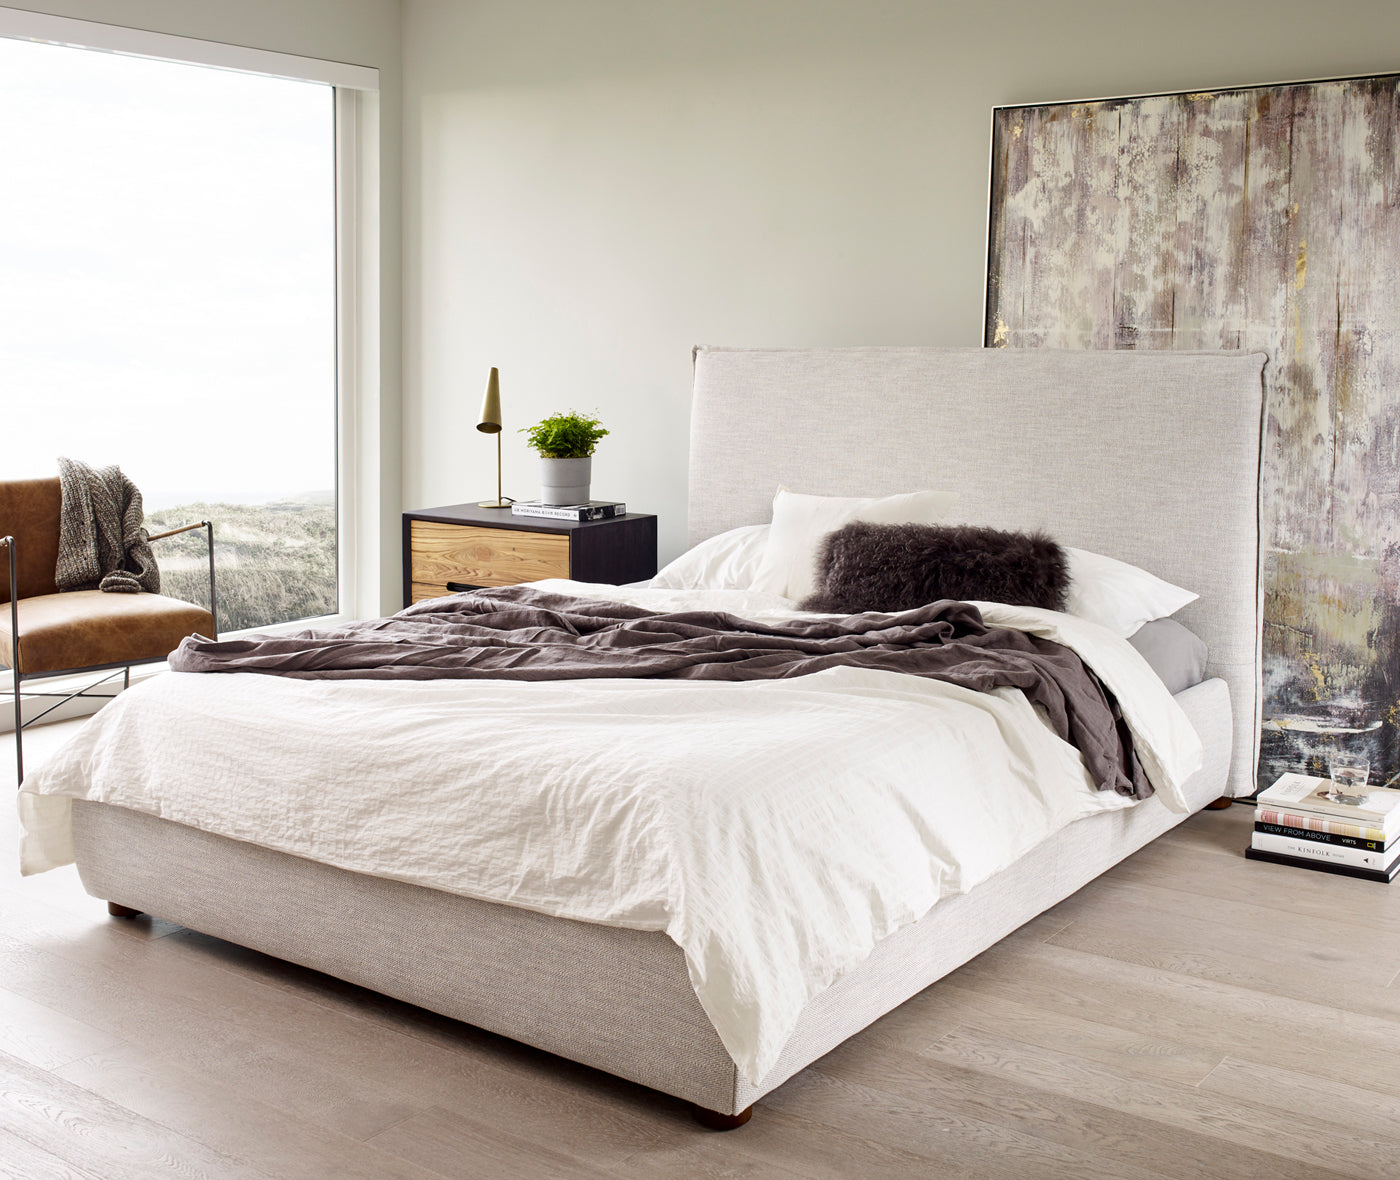 Luzon Bed - More Options